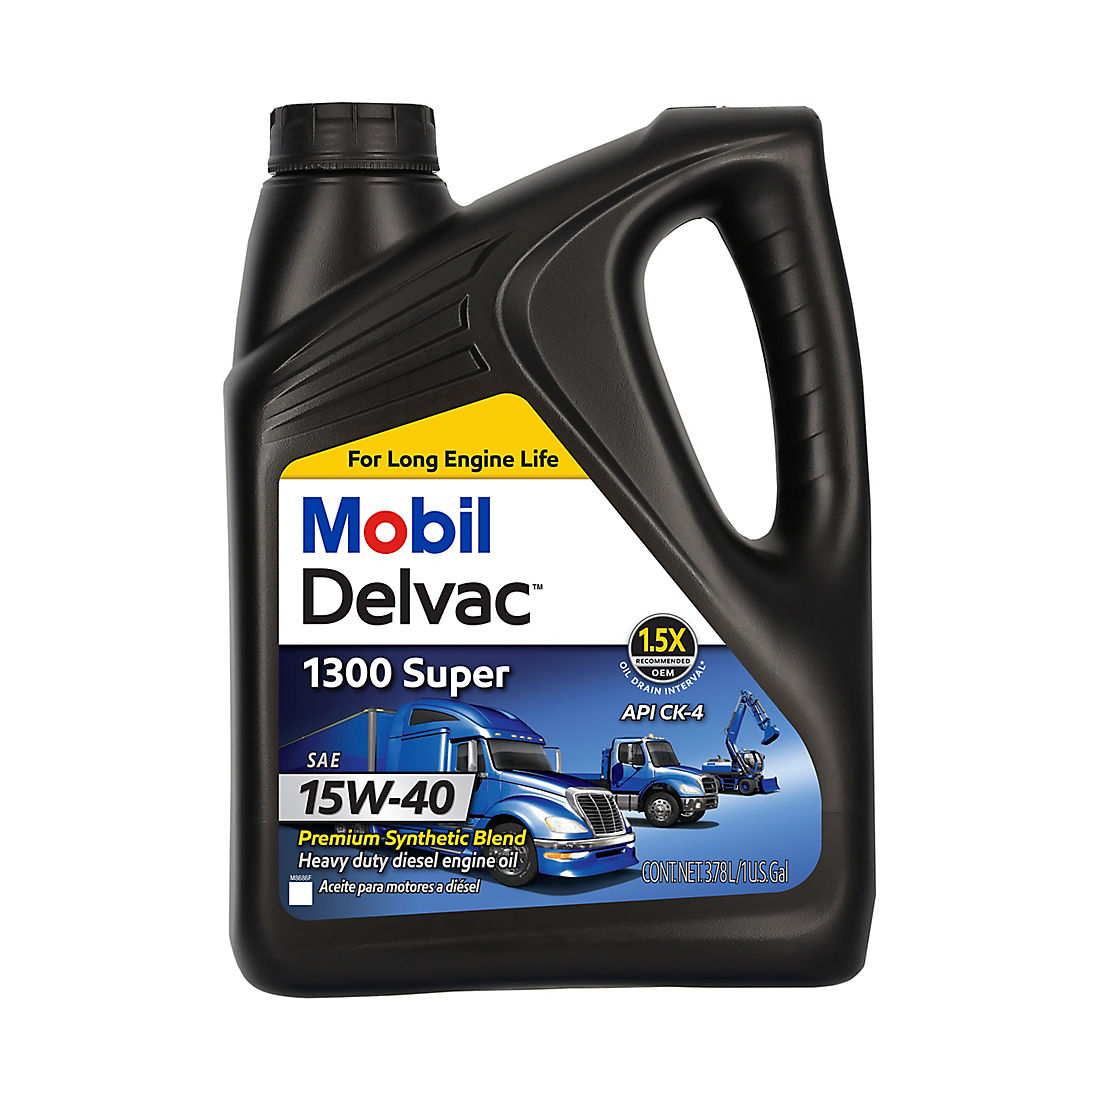 Mobil Delvac 10w 40 Diesel. Mobil 10w 40 Synthetic engine Oil. Мобил Делвак 10w 50. Oil Motor SAE 15w40. Масло 15 w